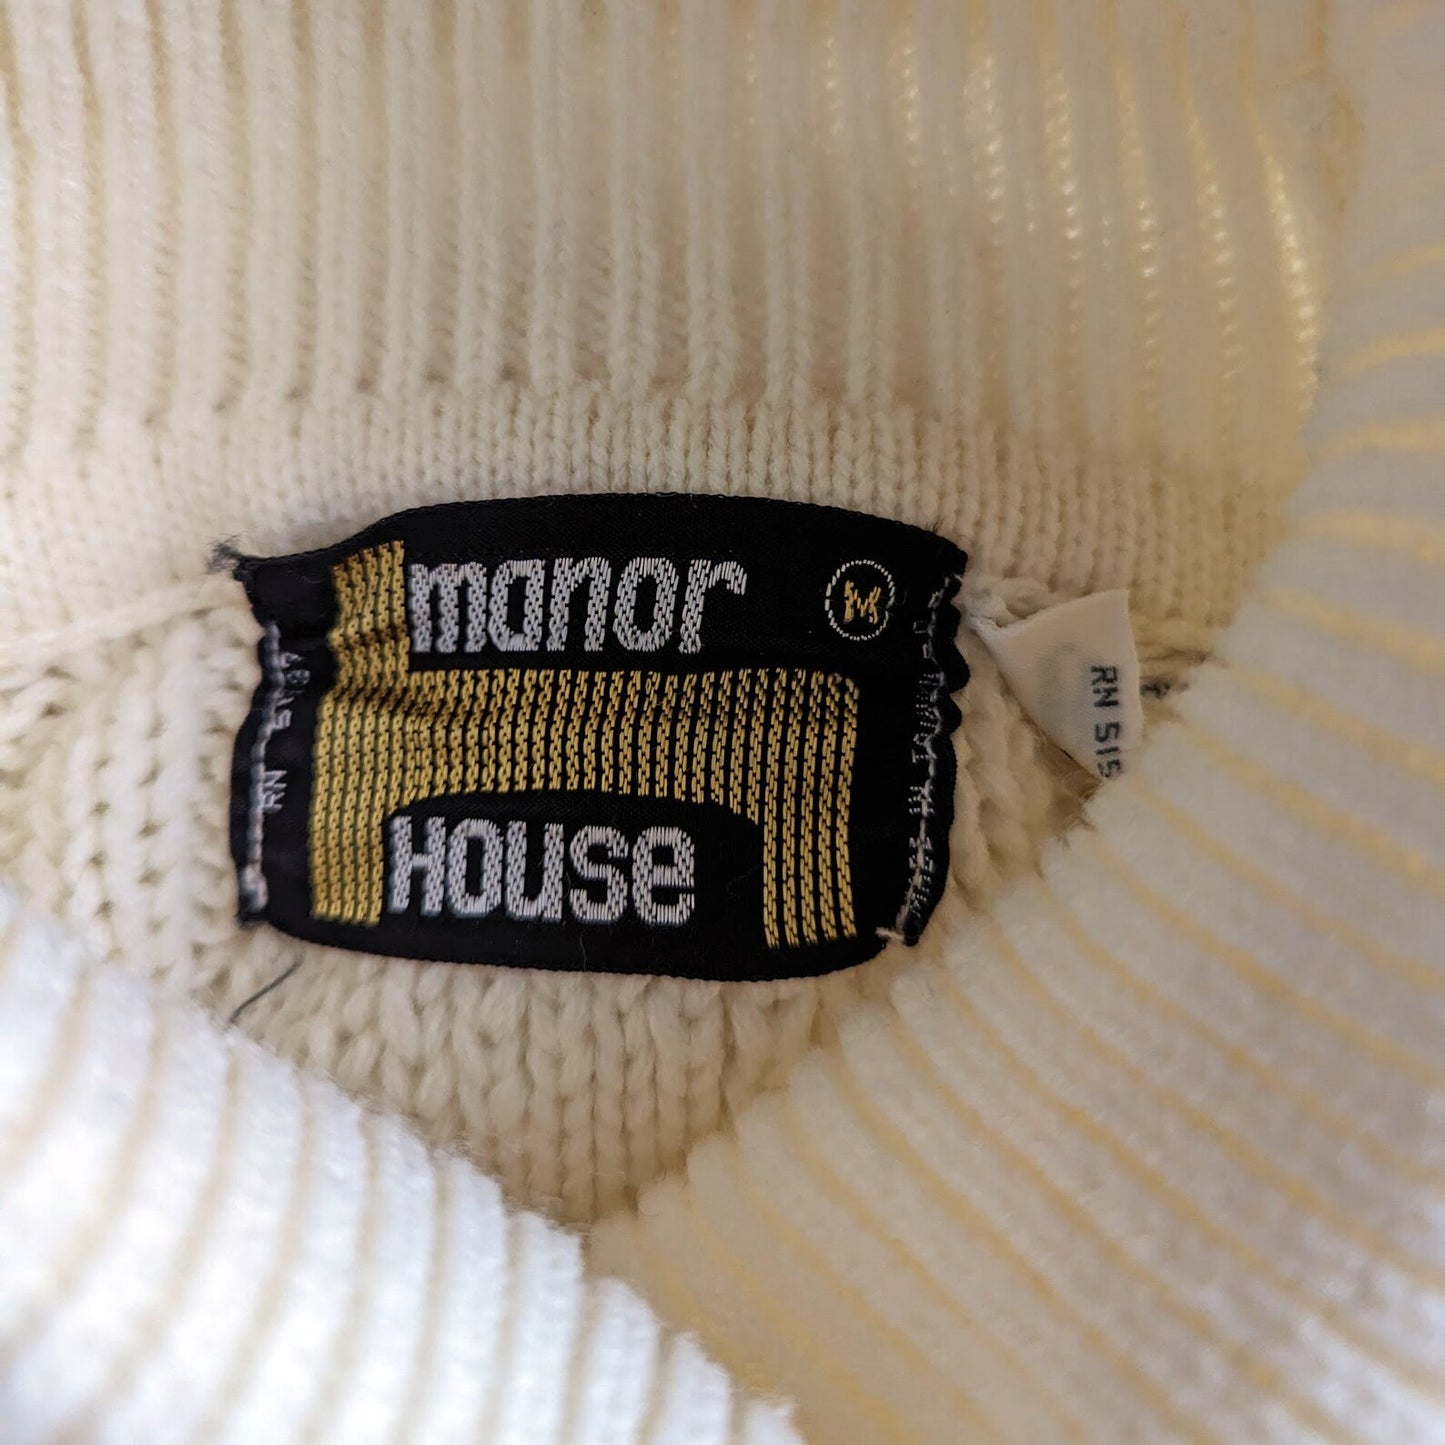 close up of the tag that says manor house